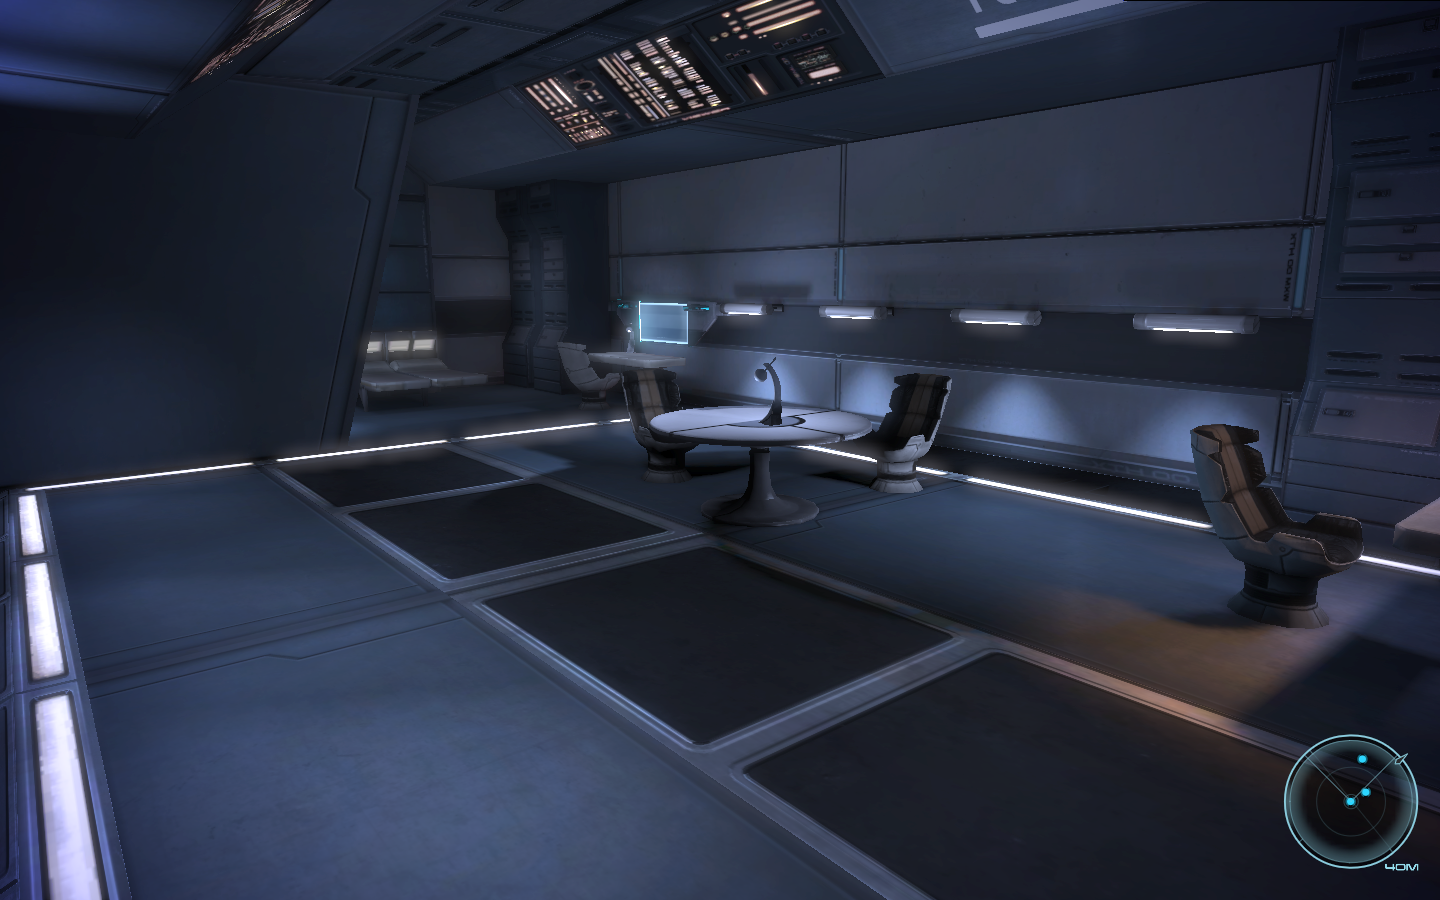 http://img3.wikia.nocookie.net/__cb20090509144437/masseffect/images/6/6c/Normandy_Personal_Quarters.png